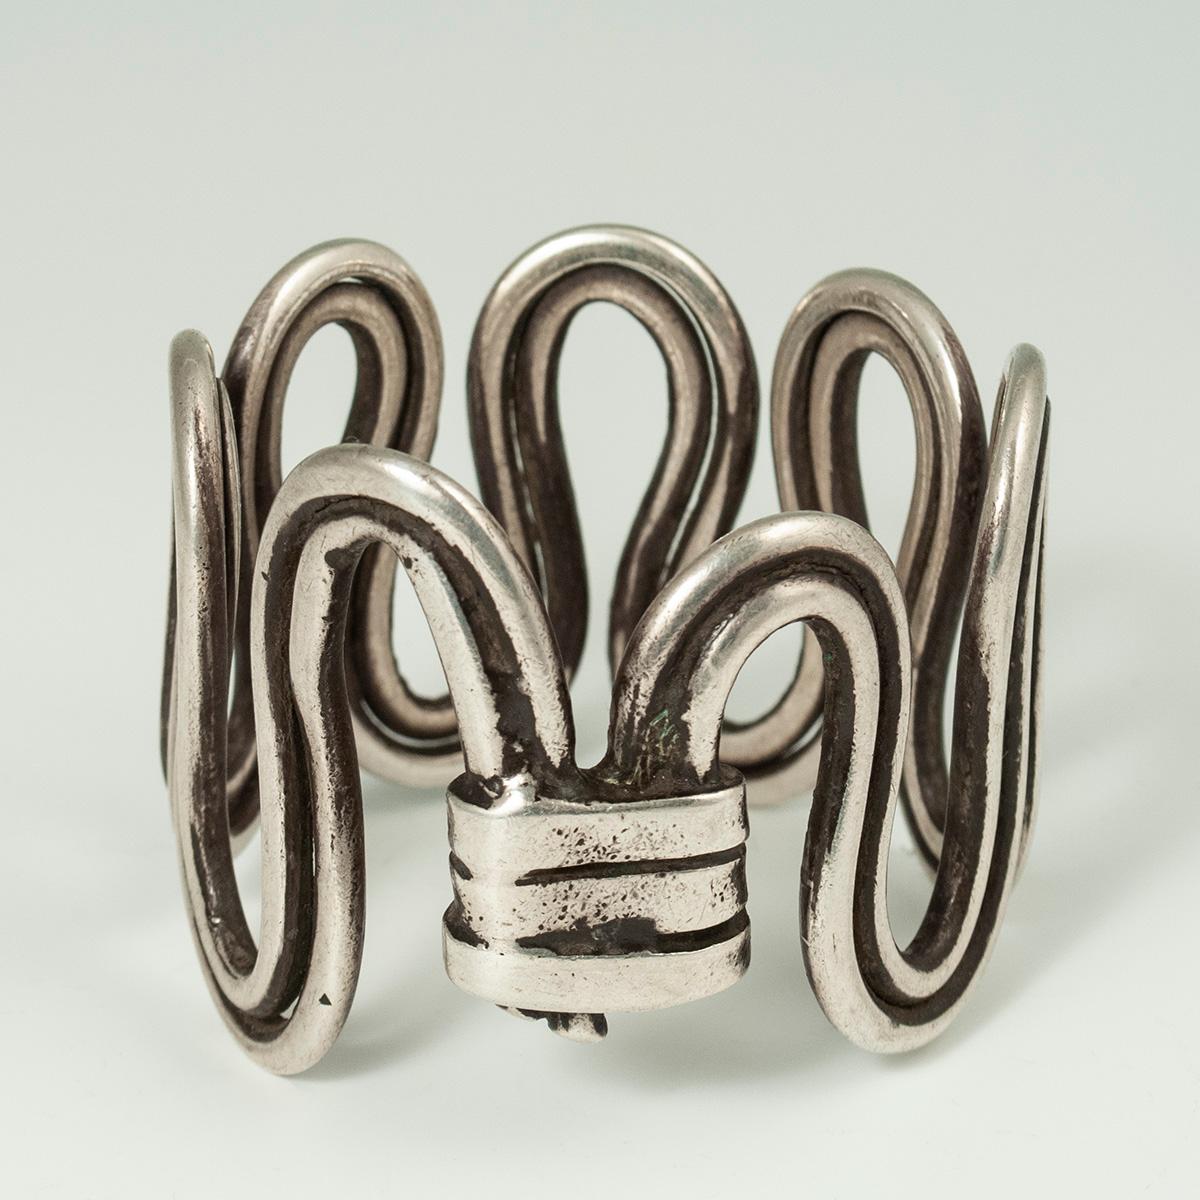 Late 19th to Early 20th Century Silver Wire Serpent Bracelet, Rajasthan, India

A substantial silver cuff made of wire bent in the shape of a serpent, these bracelets were worn on the upper arm by women in Rajasthan. It measures 7.5 inches (19 cm)